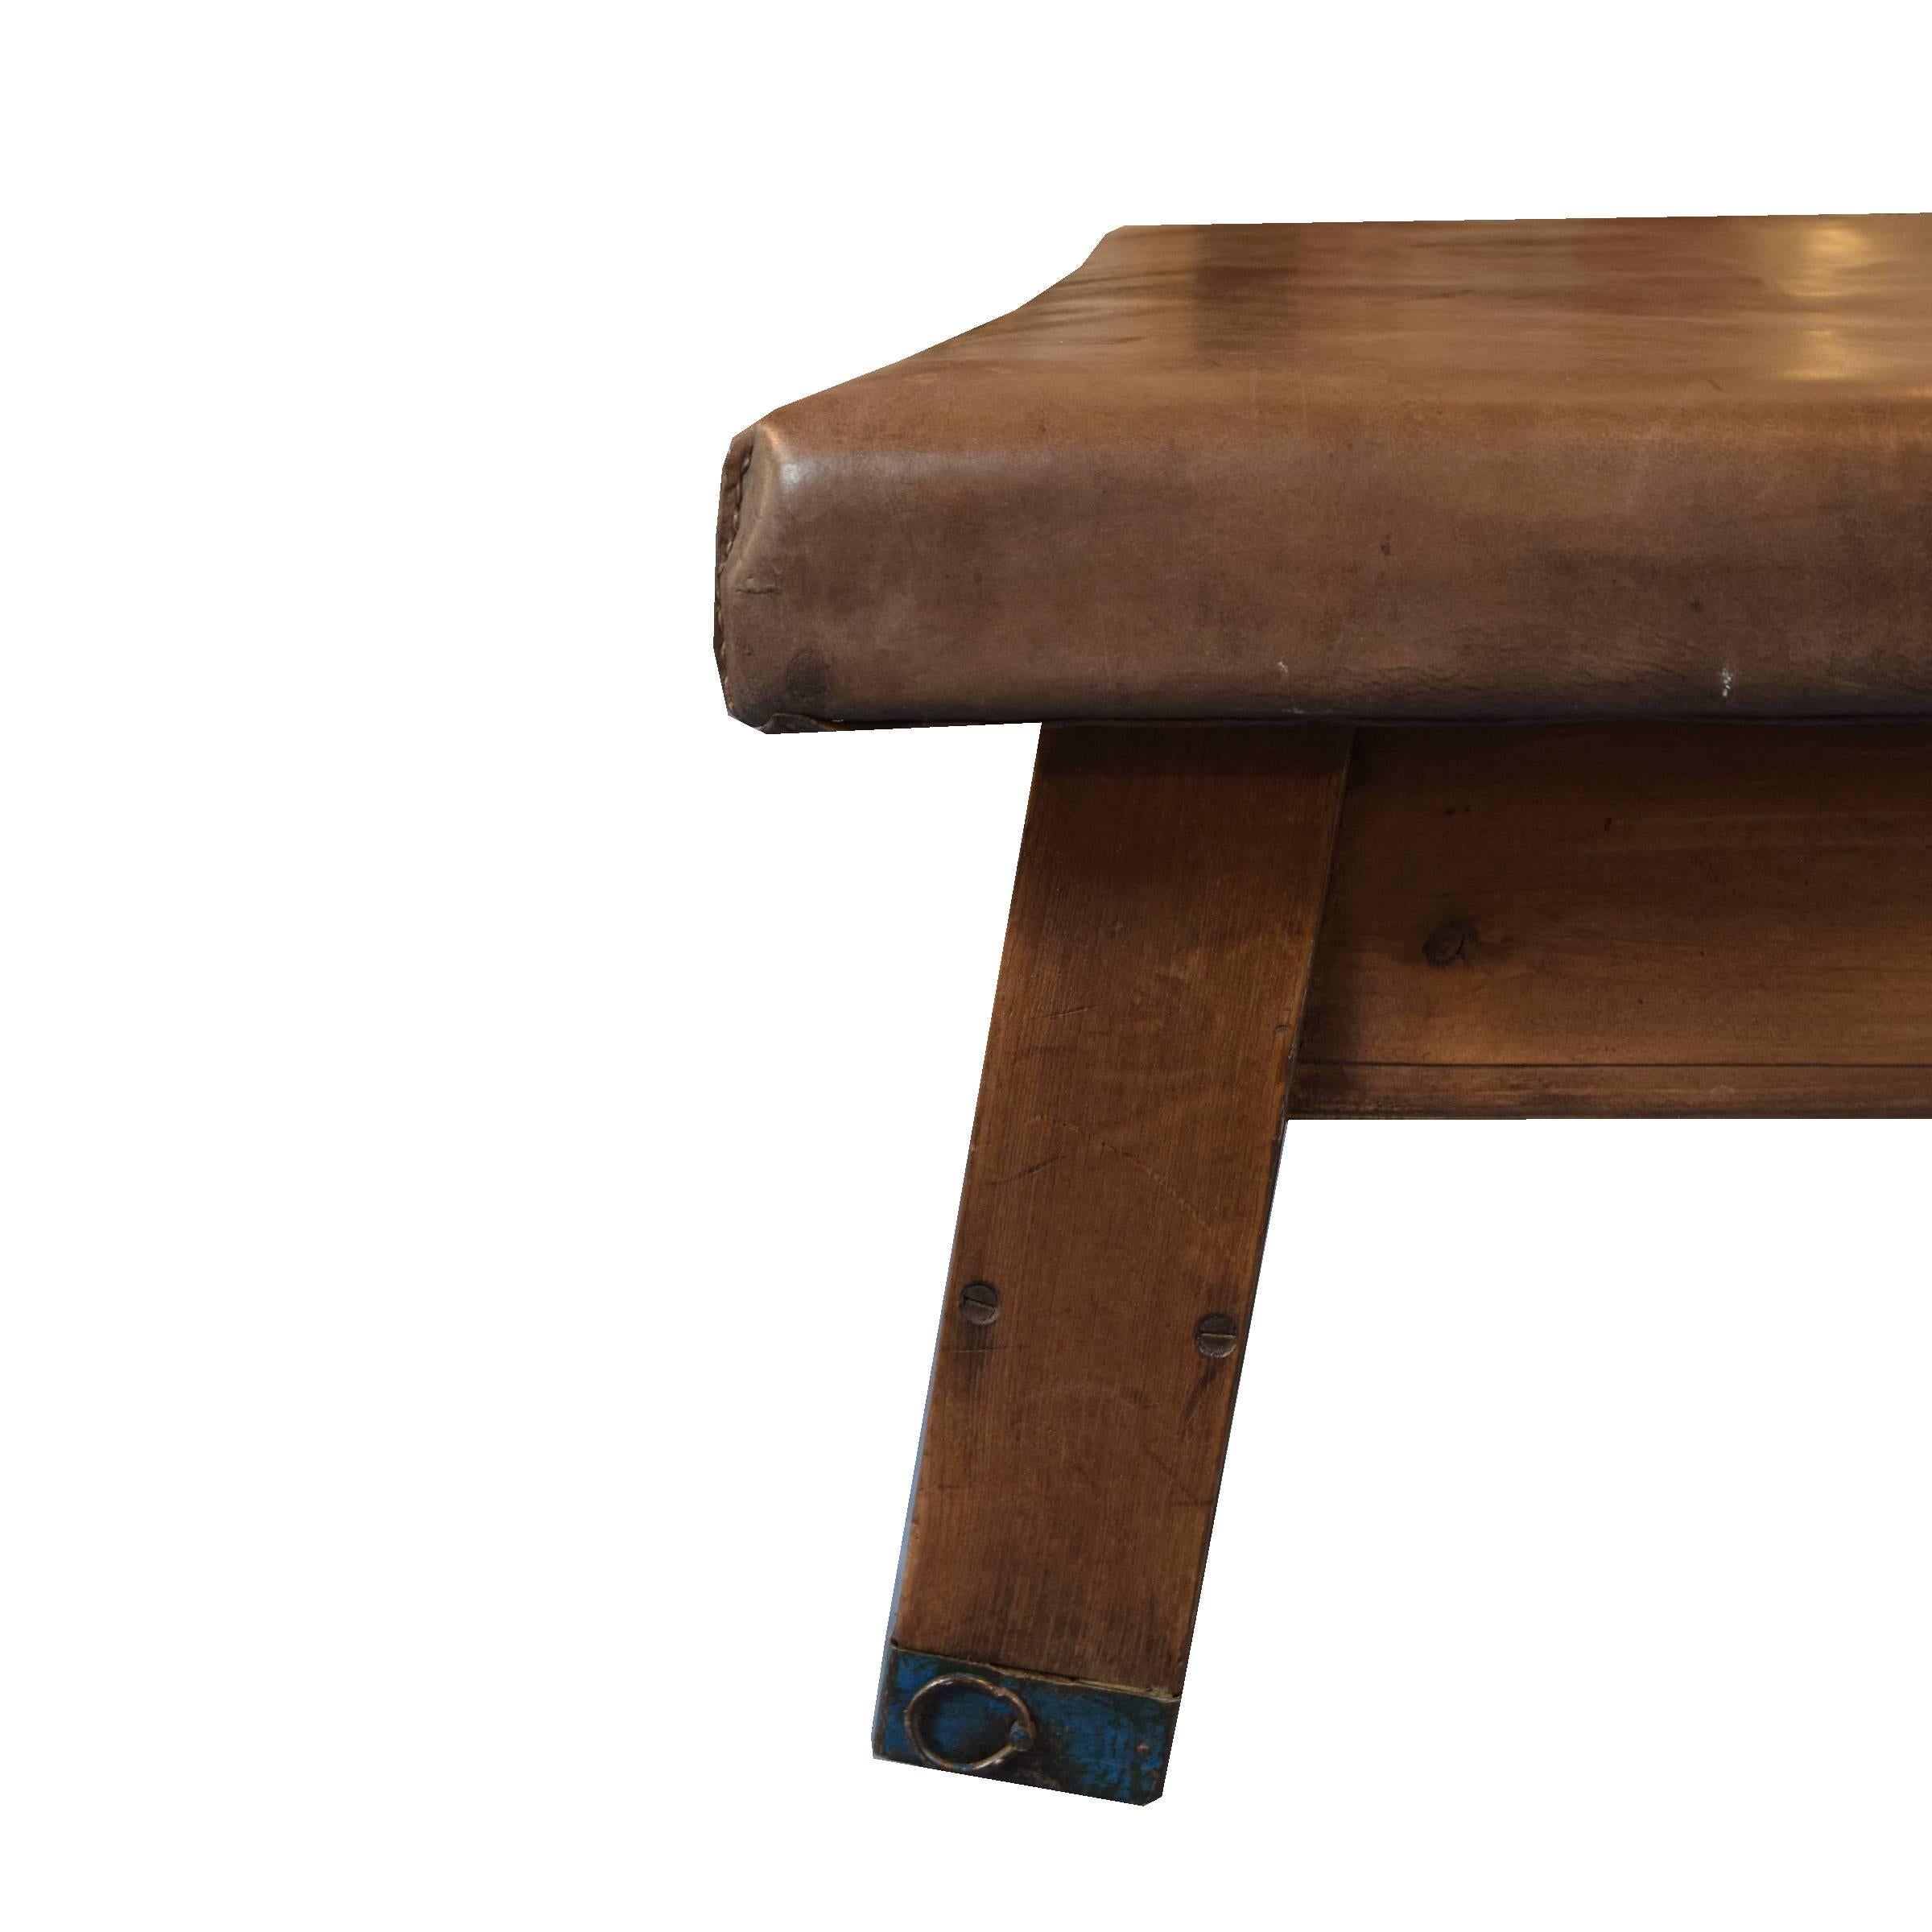 20th Century Wood and Leather Vaulting Bench or Table